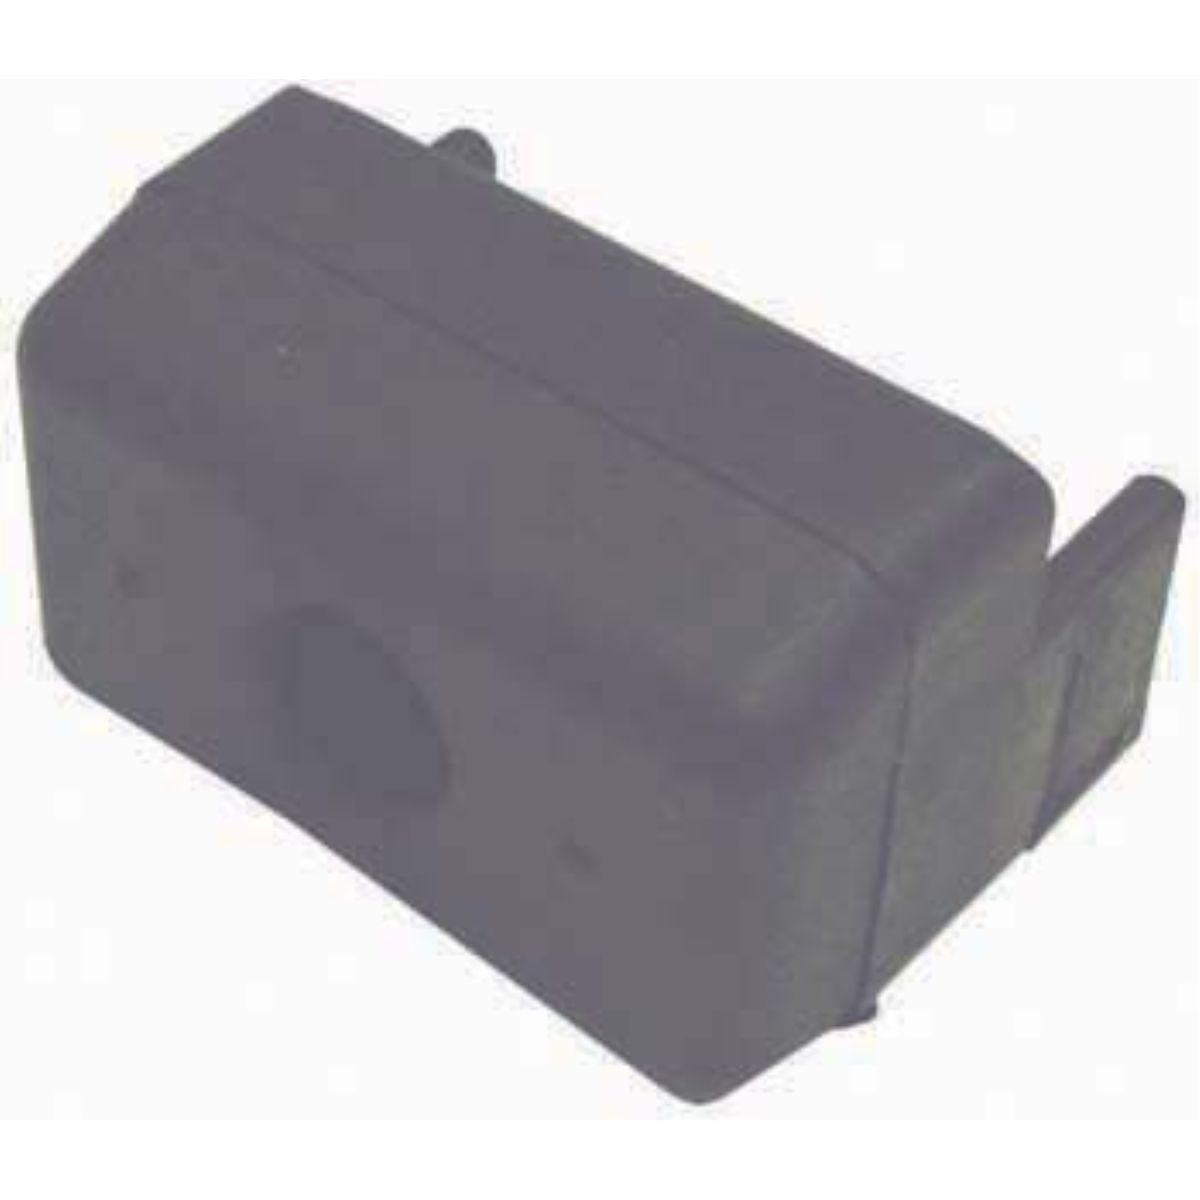 Rubber Pad For Hunter Tire Changers